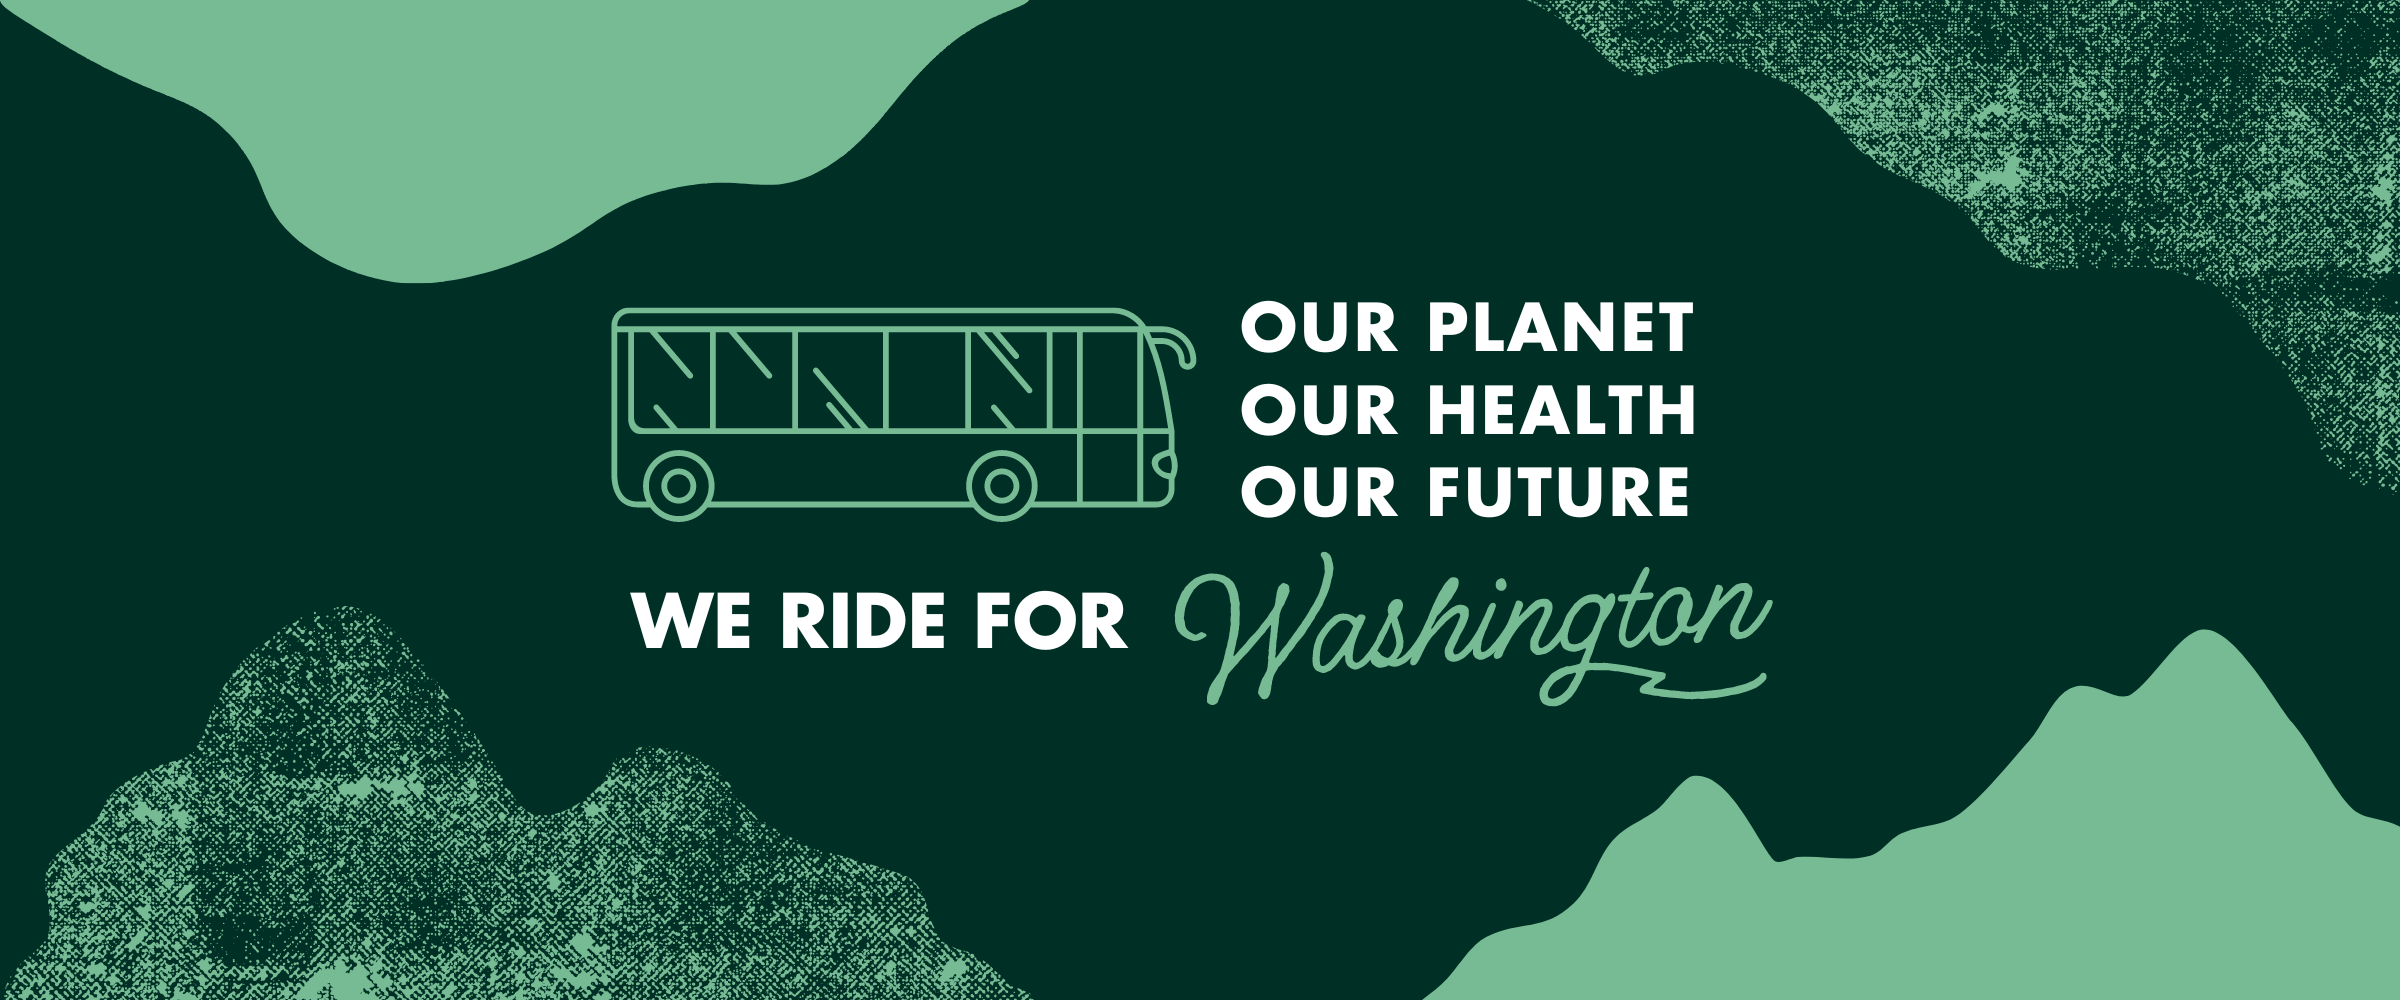 Illustration of a Bus with text: We Ride For Our Planet, Our Health, Our Future... Washington. 